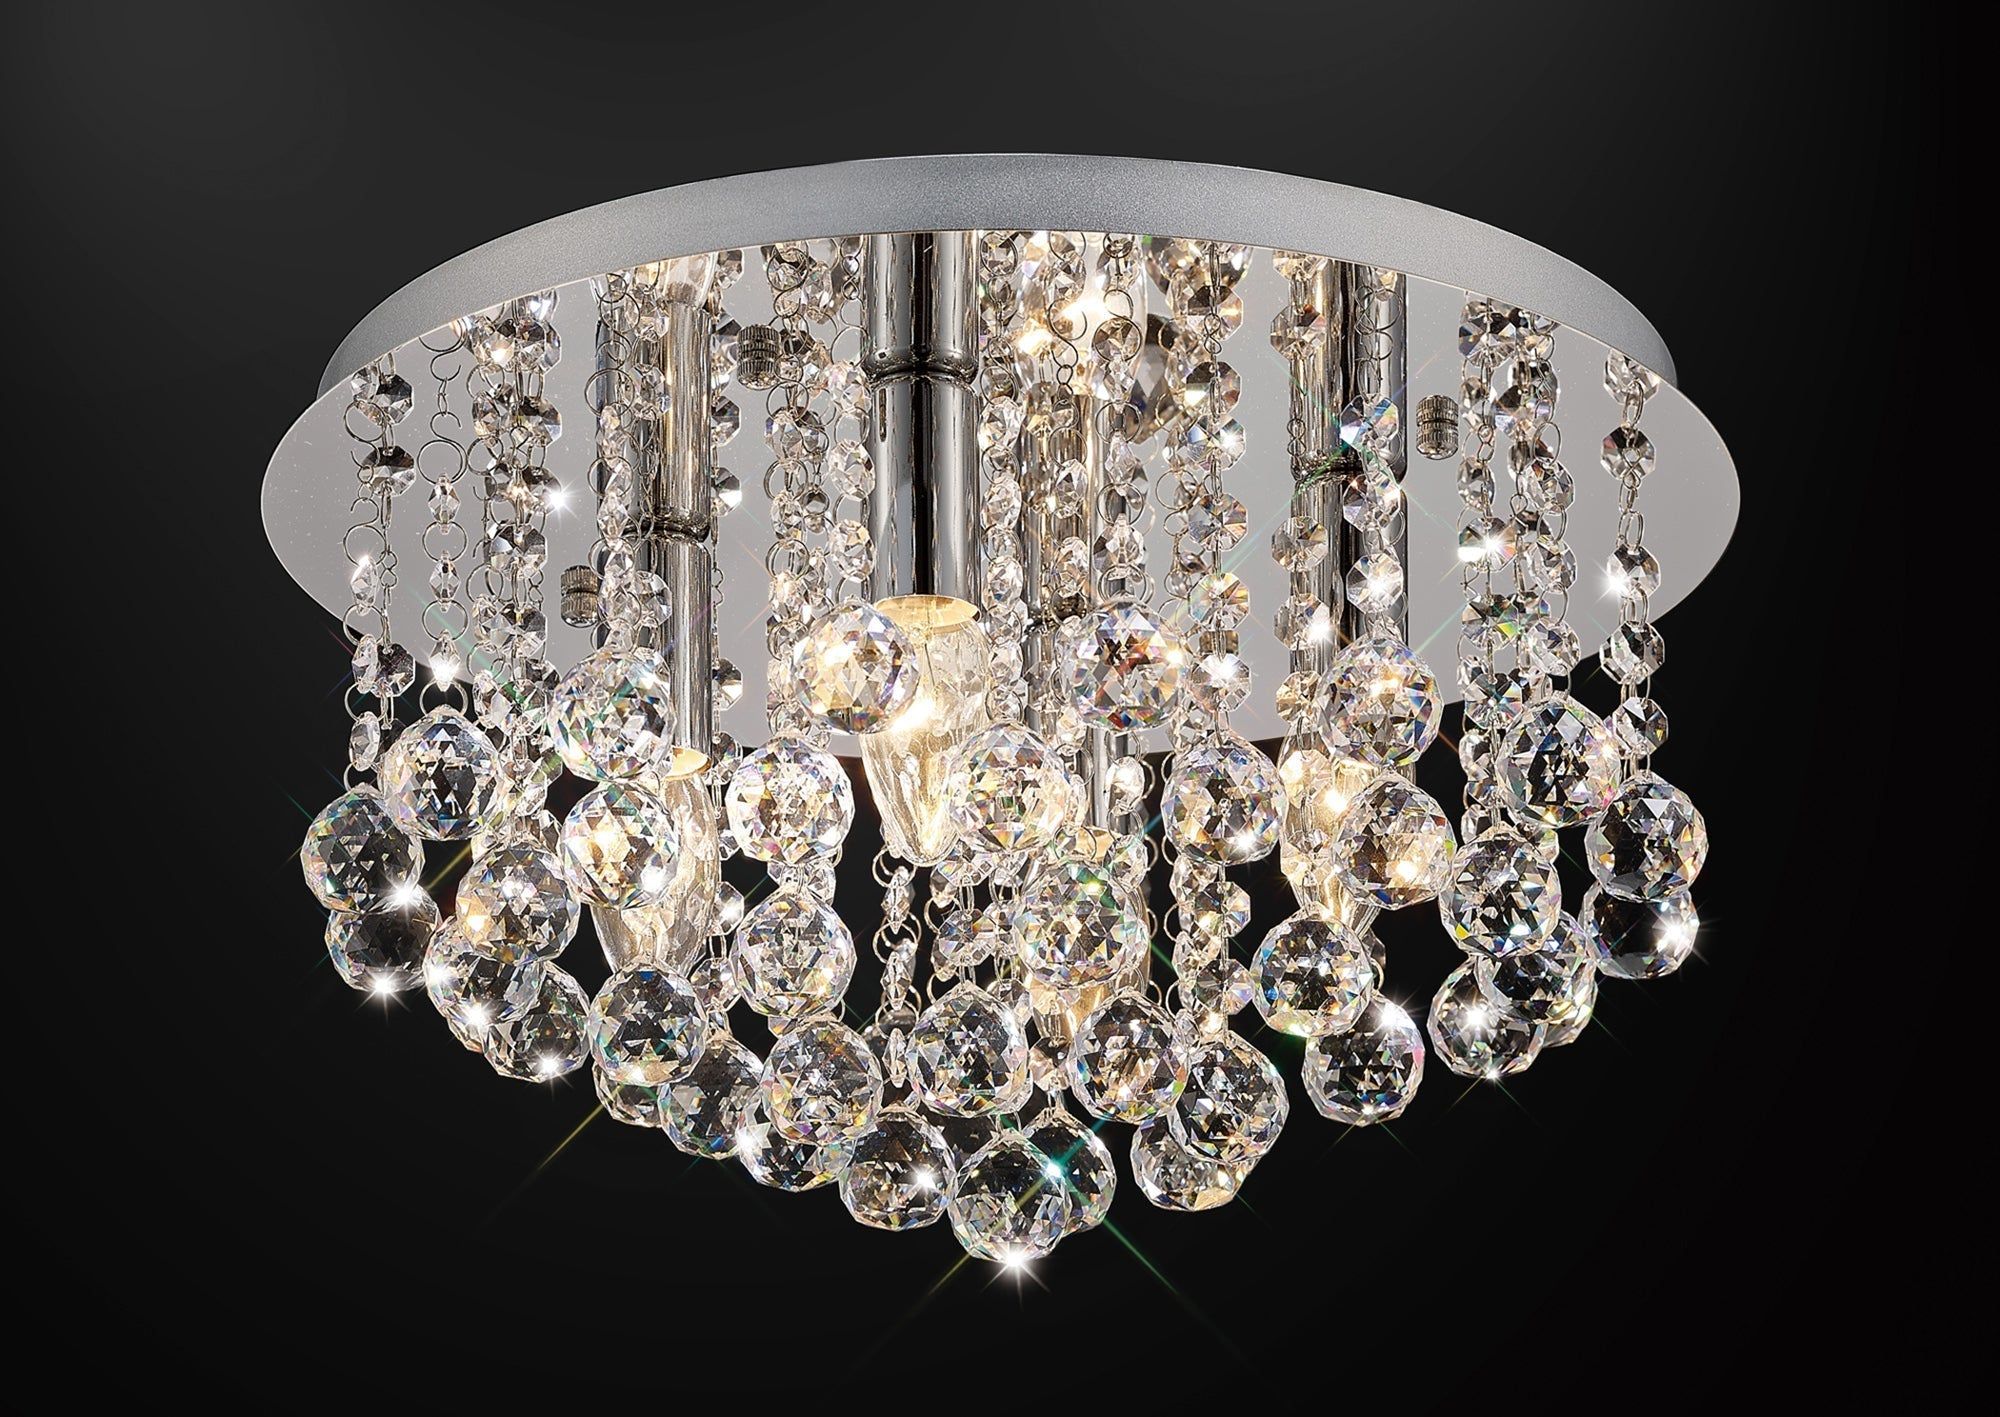 Acton Flush Ceiling 4 Light E14, 380mm Round, Polished Chrome, Antique Brass/Sphere Crystal - Cusack Lighting